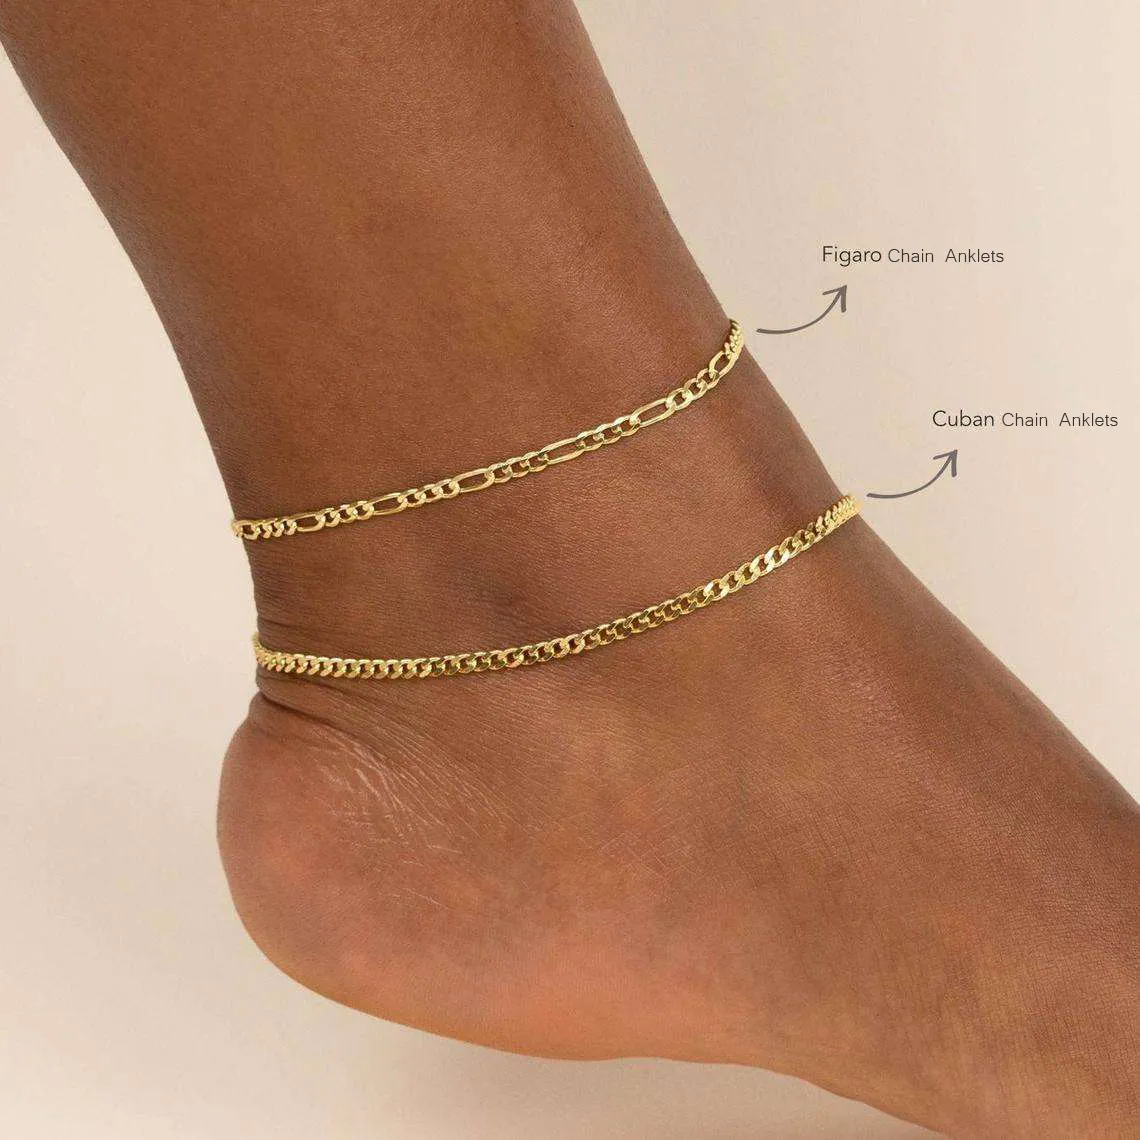 RINNTIN 14K Gold Color Adjustable Link Bracelet Anklet For Women Beach Foot Jewelry 925 Sterling Silver Leg Cuban Chain Anklets